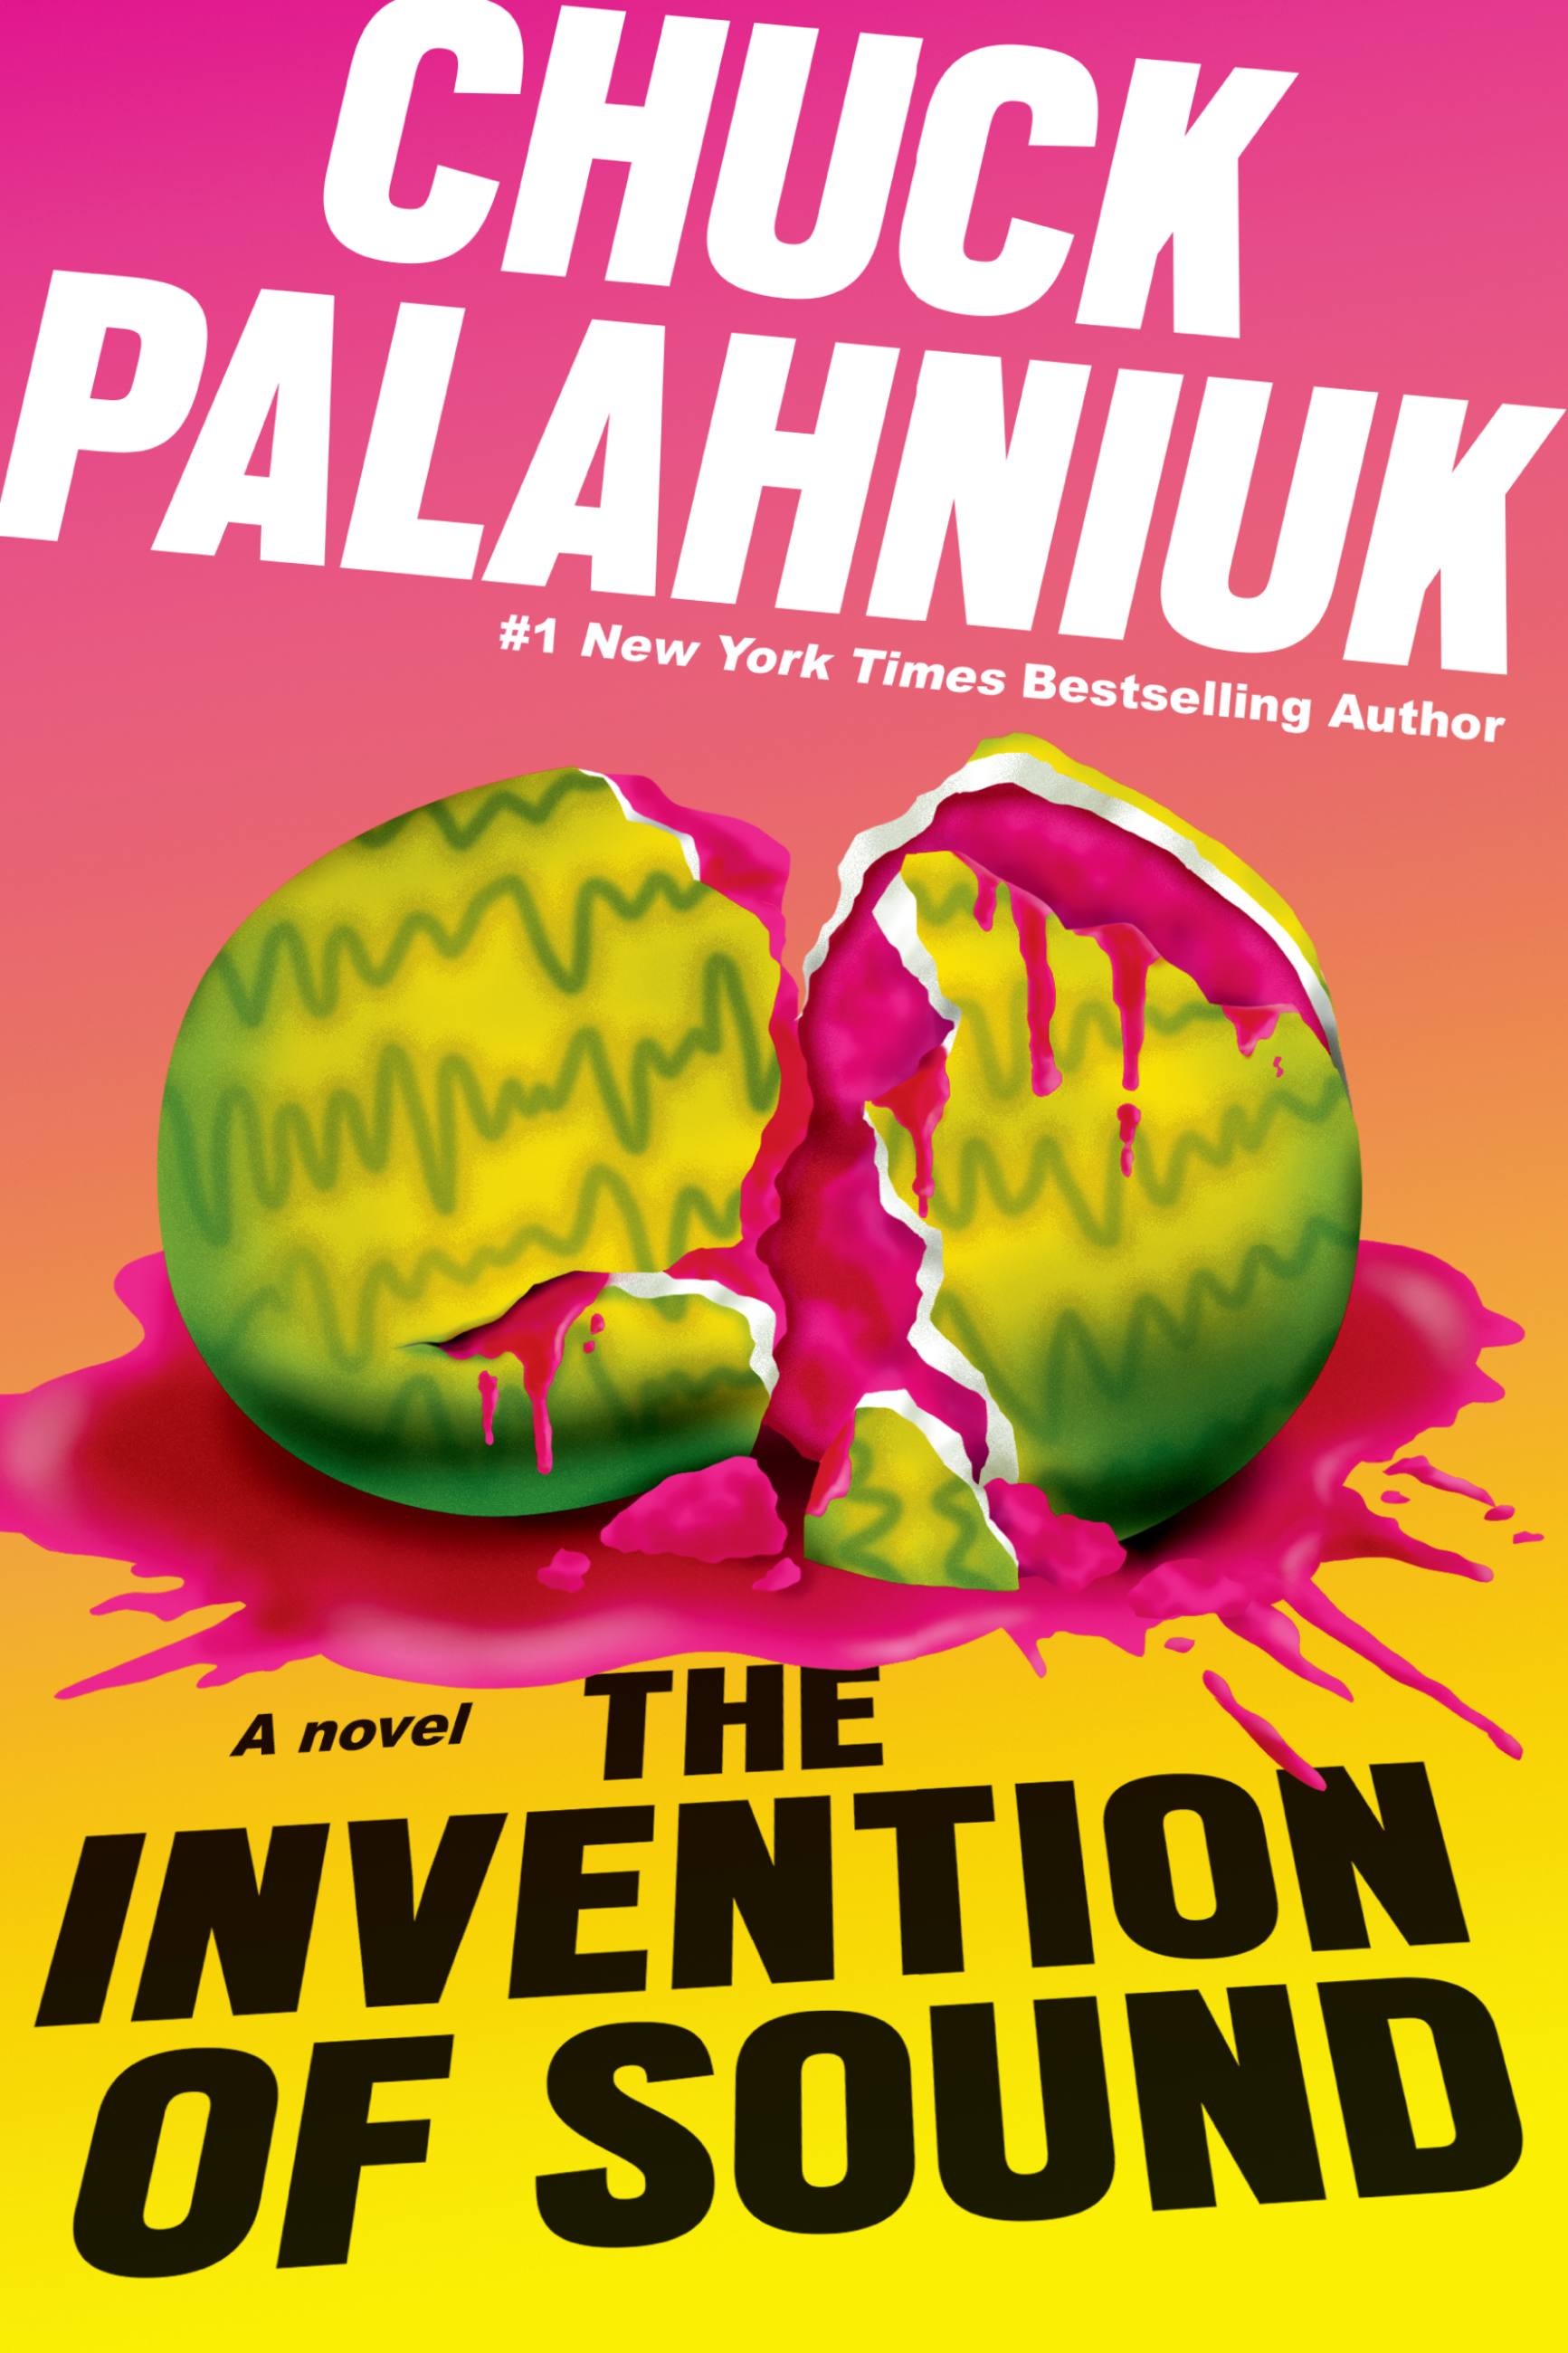 The Invention of Sound by Chuck Palahniuk Hachette Book Group